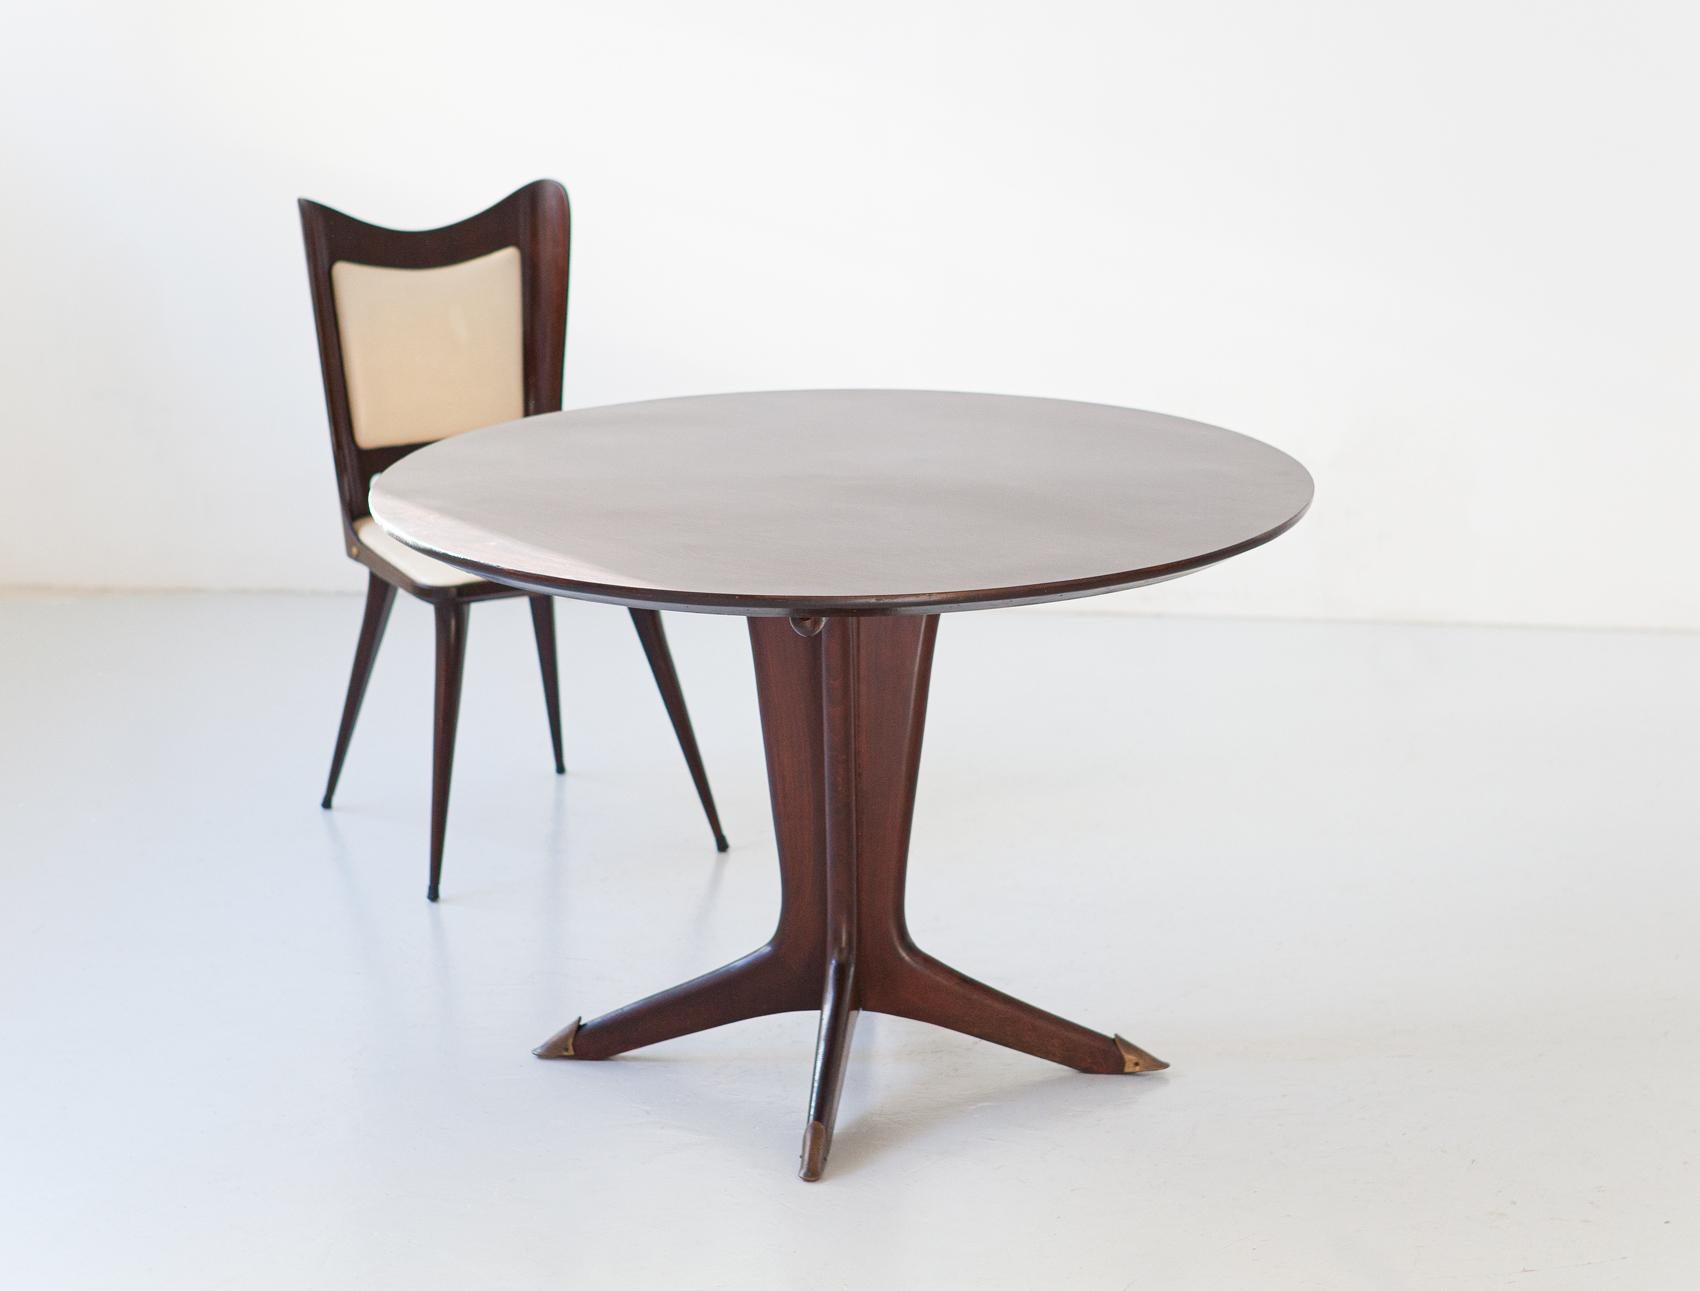 Mid-20th Century Italian Round Wooden Dining Table with 4 Chairs Set by Carlo Ratti